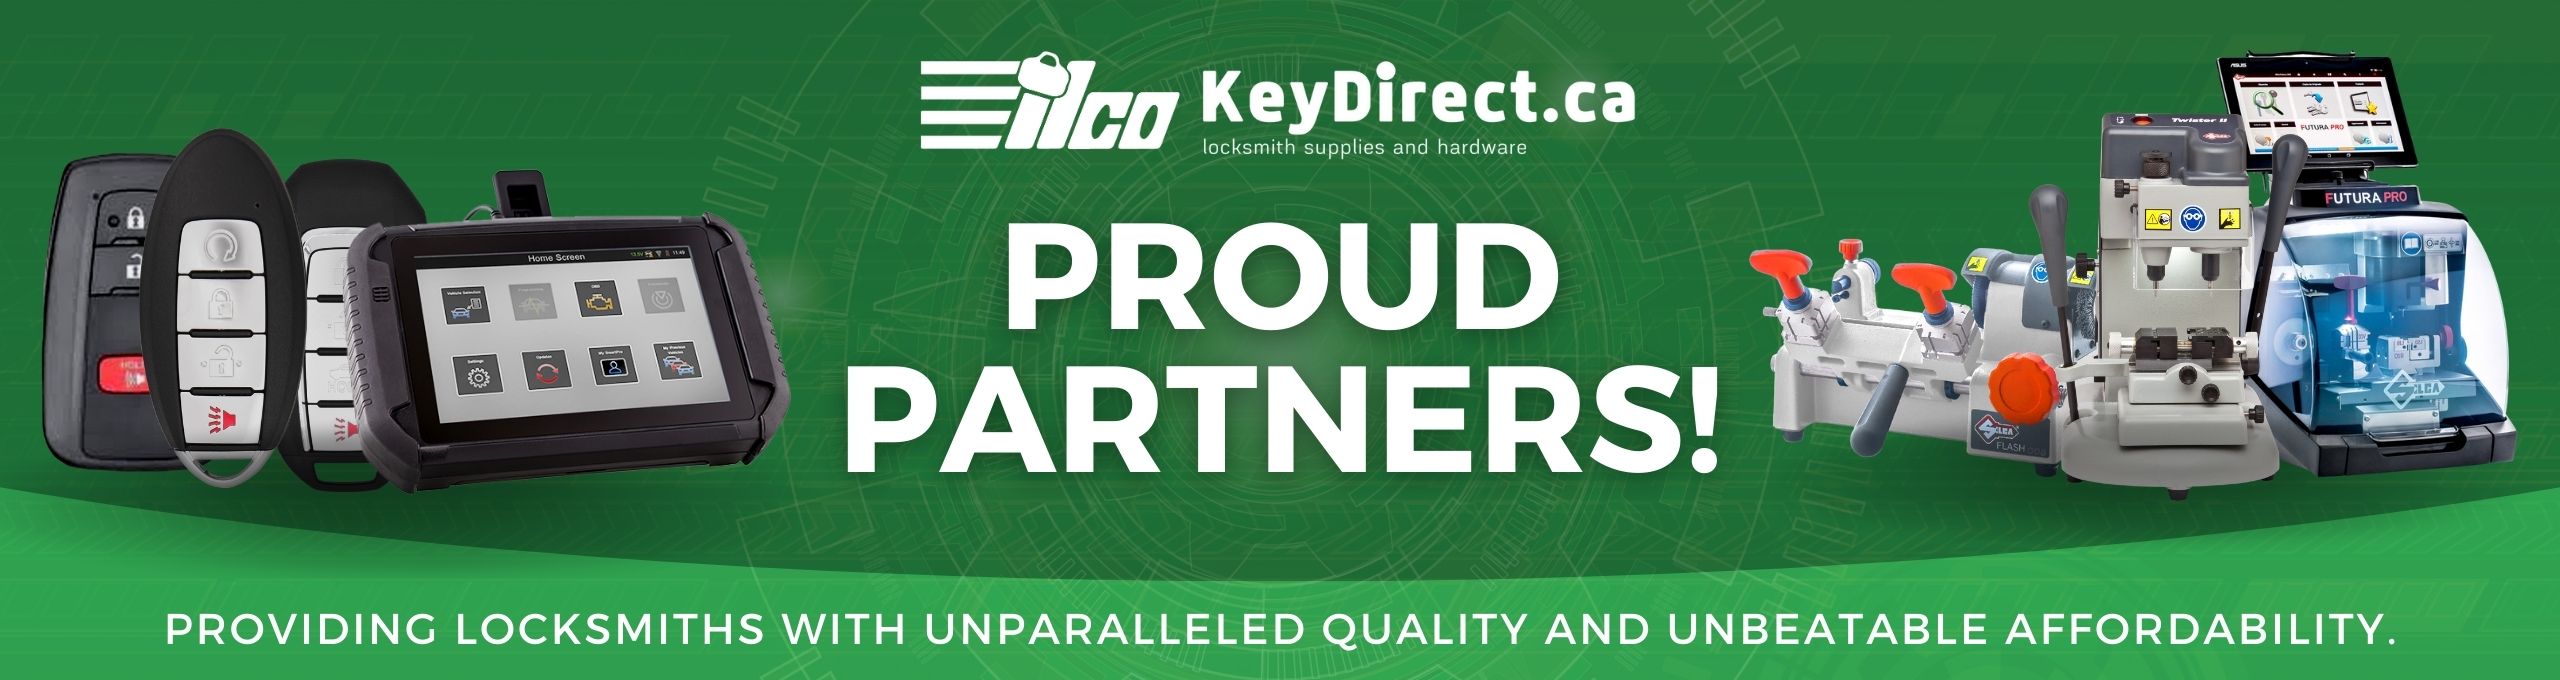 key-direct-and-ilco-proud-partners (2)